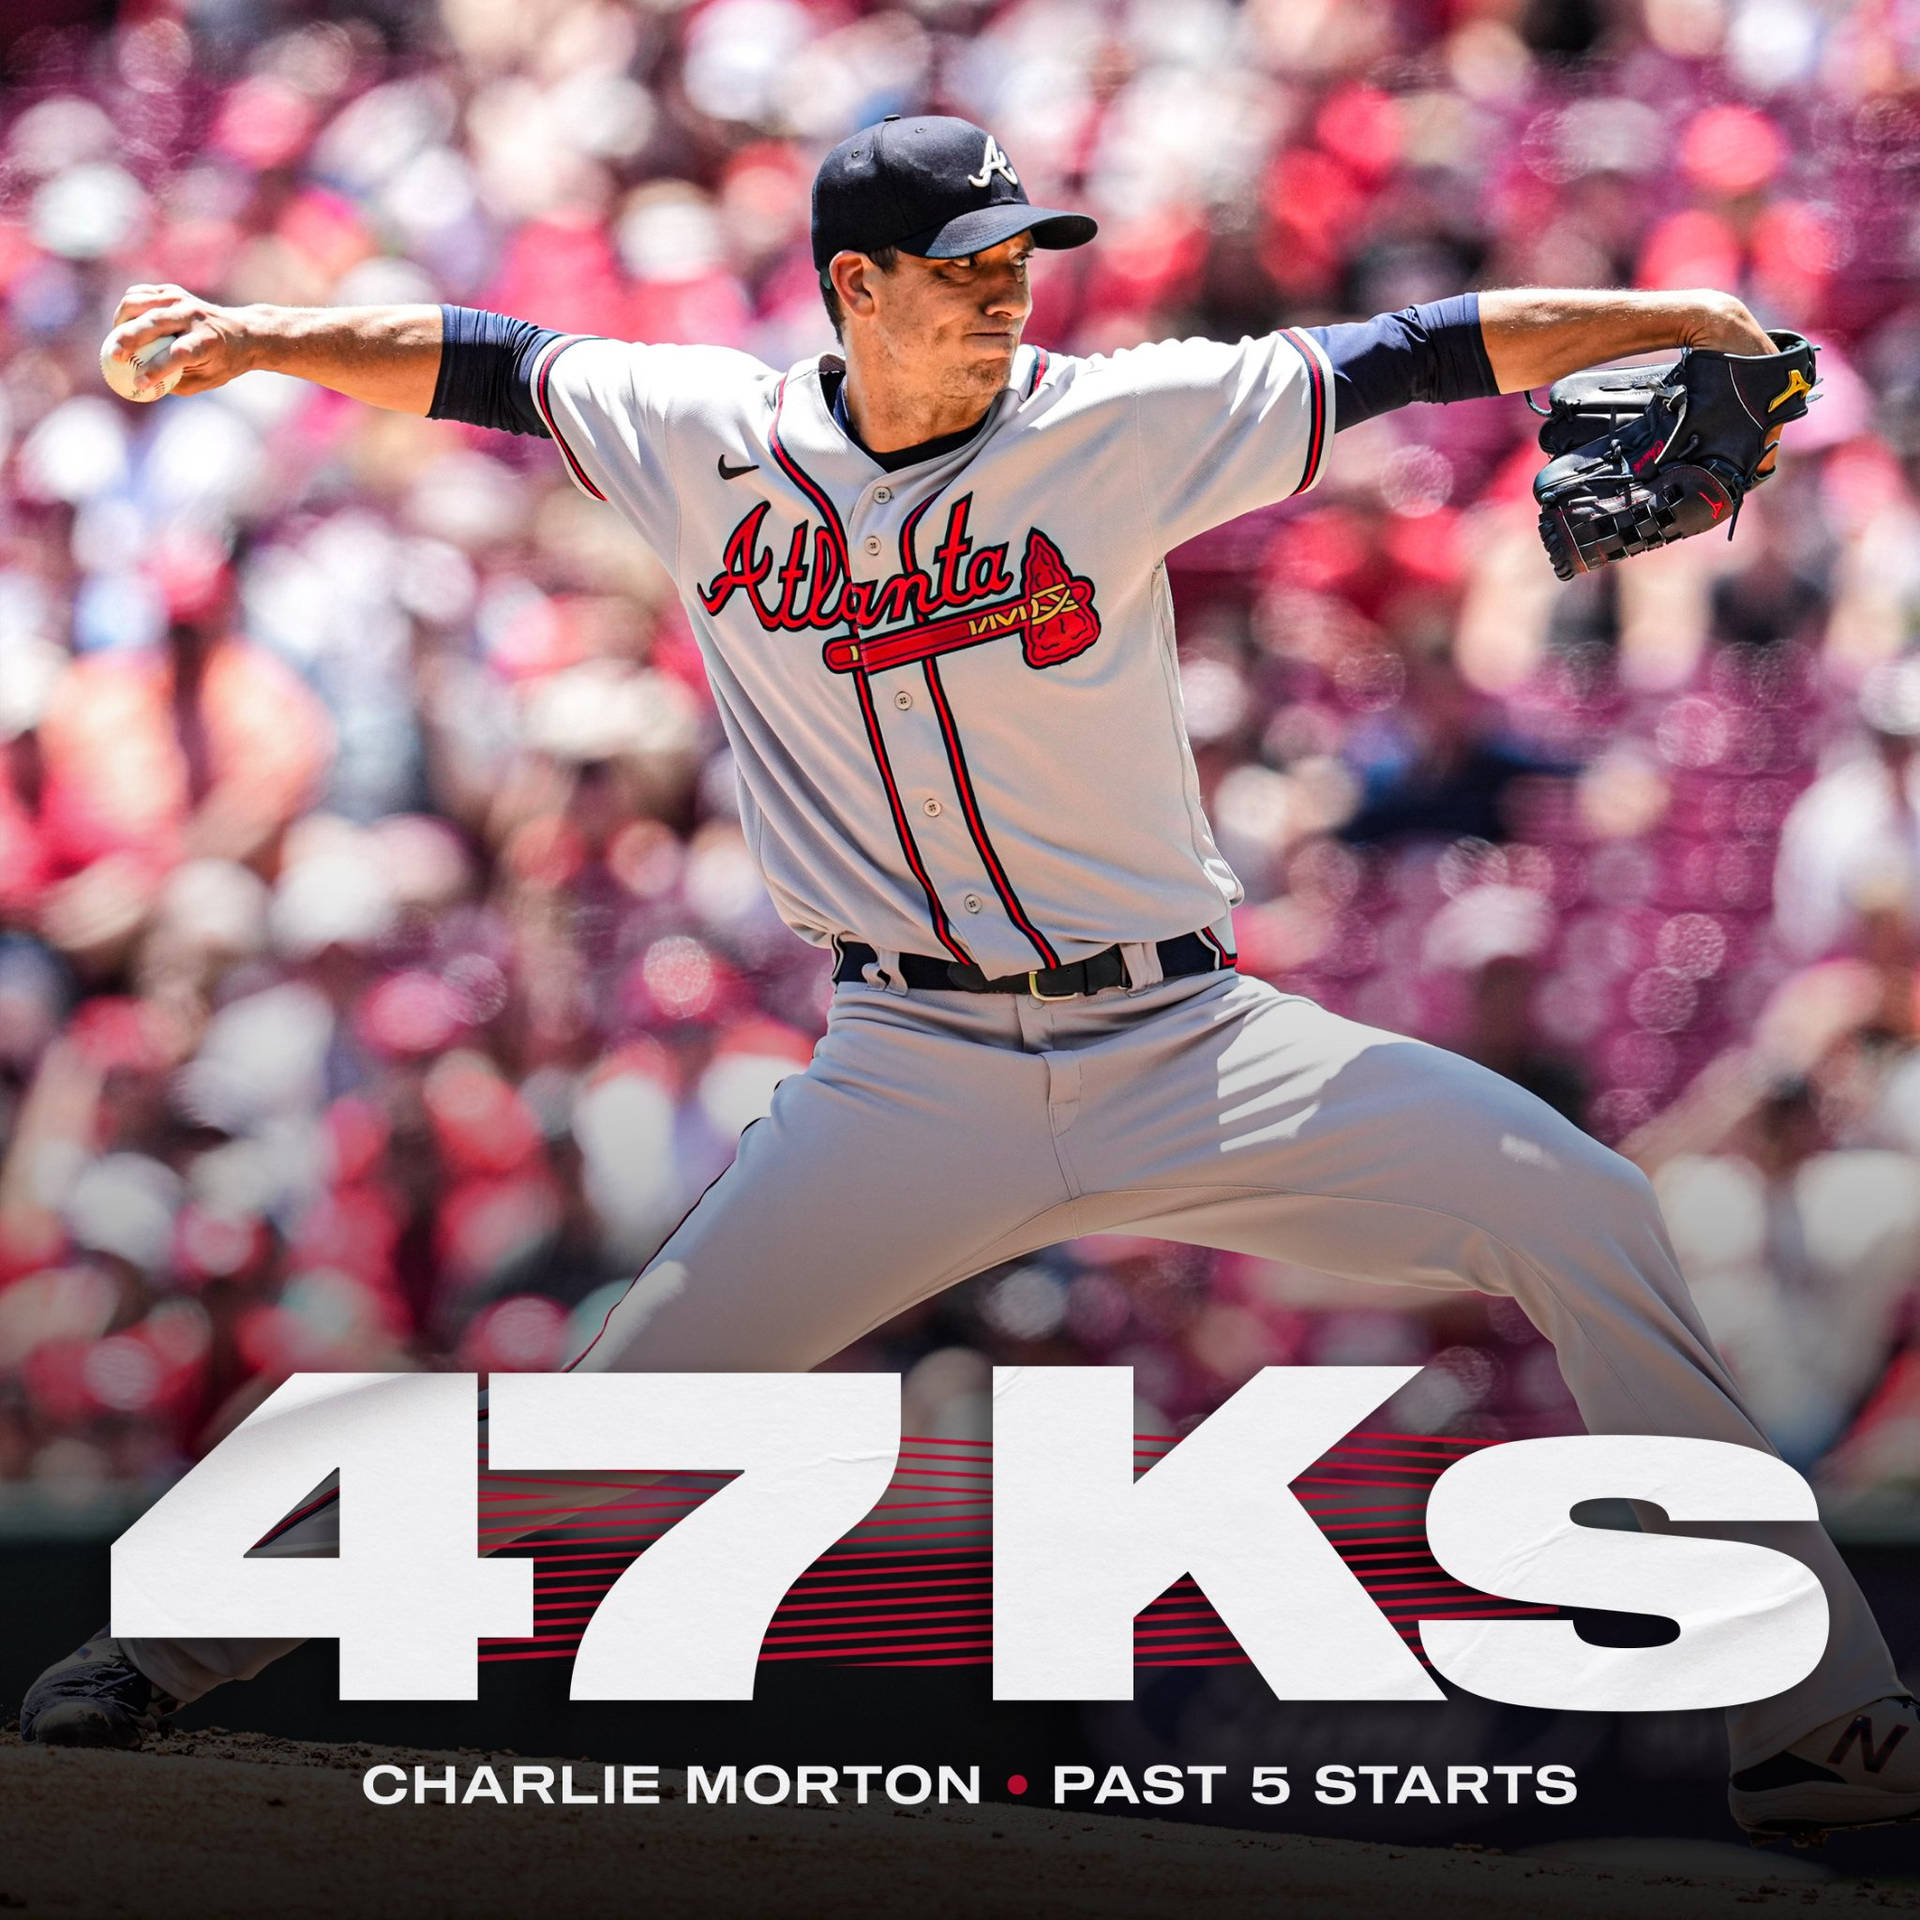 Charlie Morton in action during a game, showcasing his athletic prowess Wallpaper